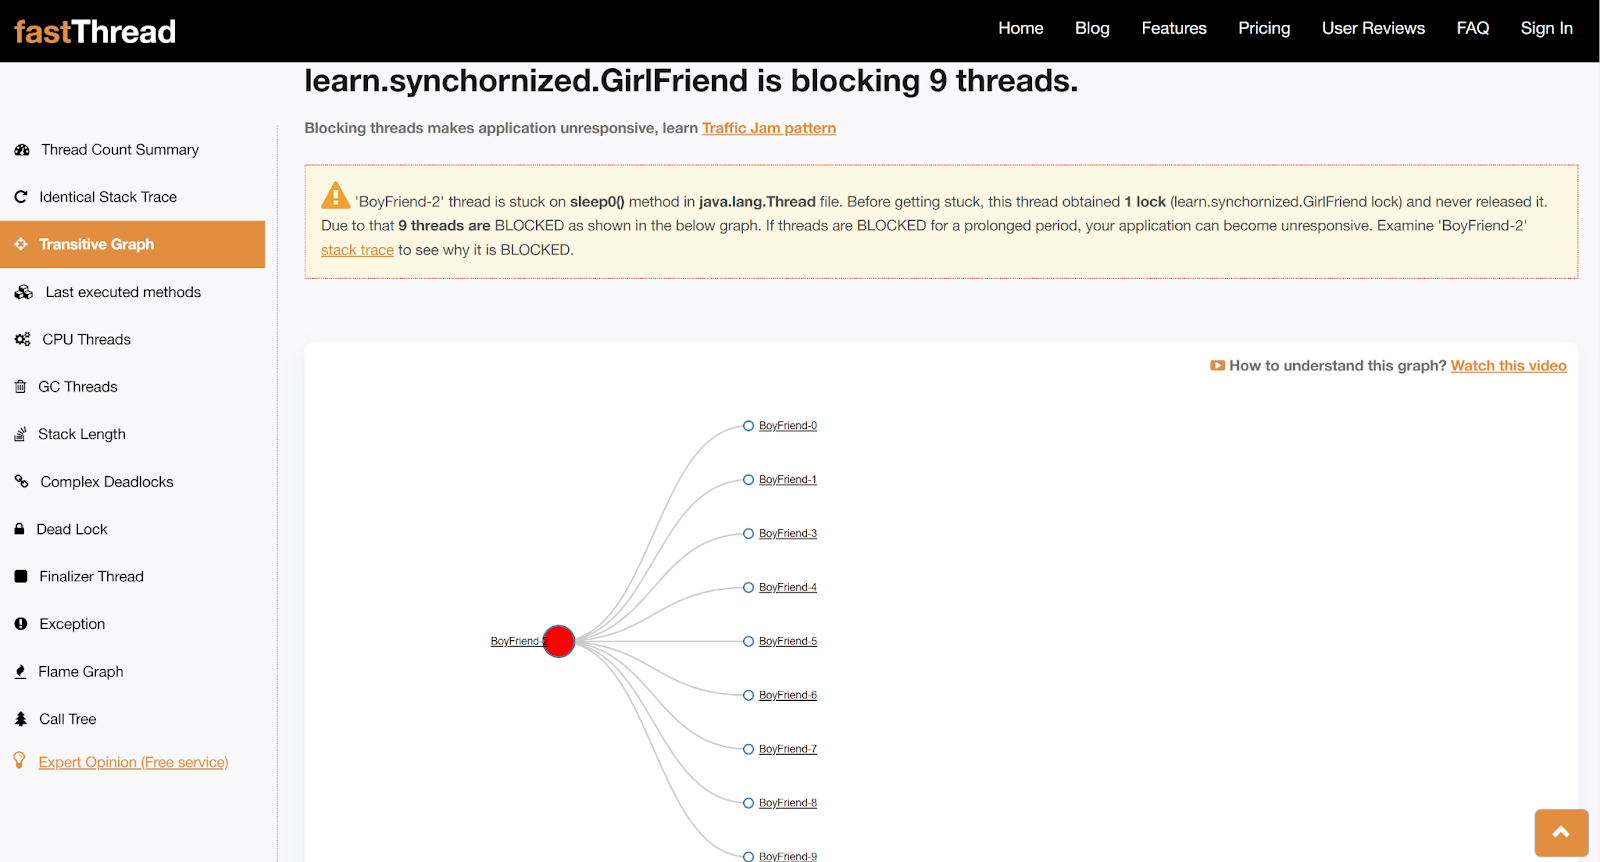 fastThread tool reporting 9 threads to be in BLOCKED state when accessing GirlFriend Object